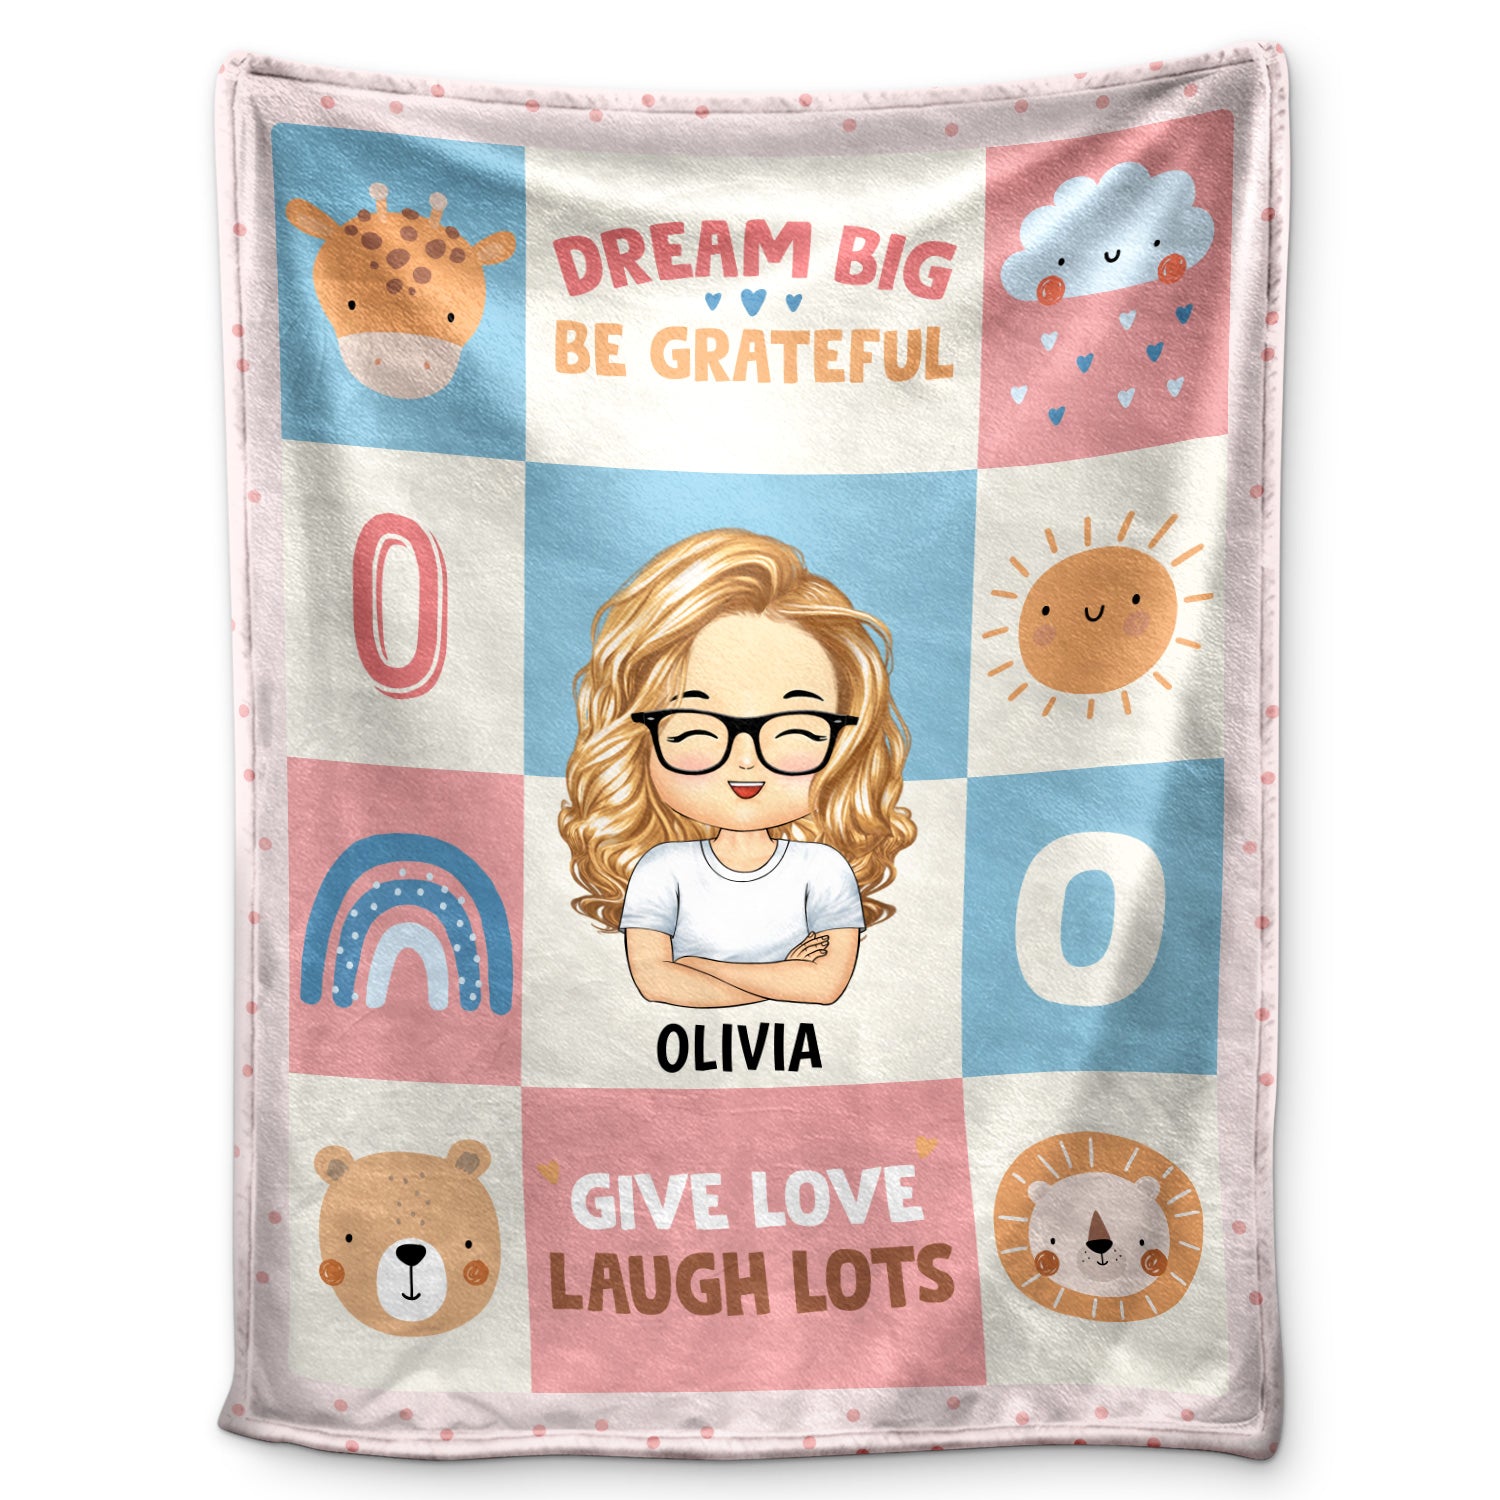 Dream Big Be Grateful Give Love Laugh Lots - Gift For Kids, Back To School Gift - Personalized Fleece Blanket